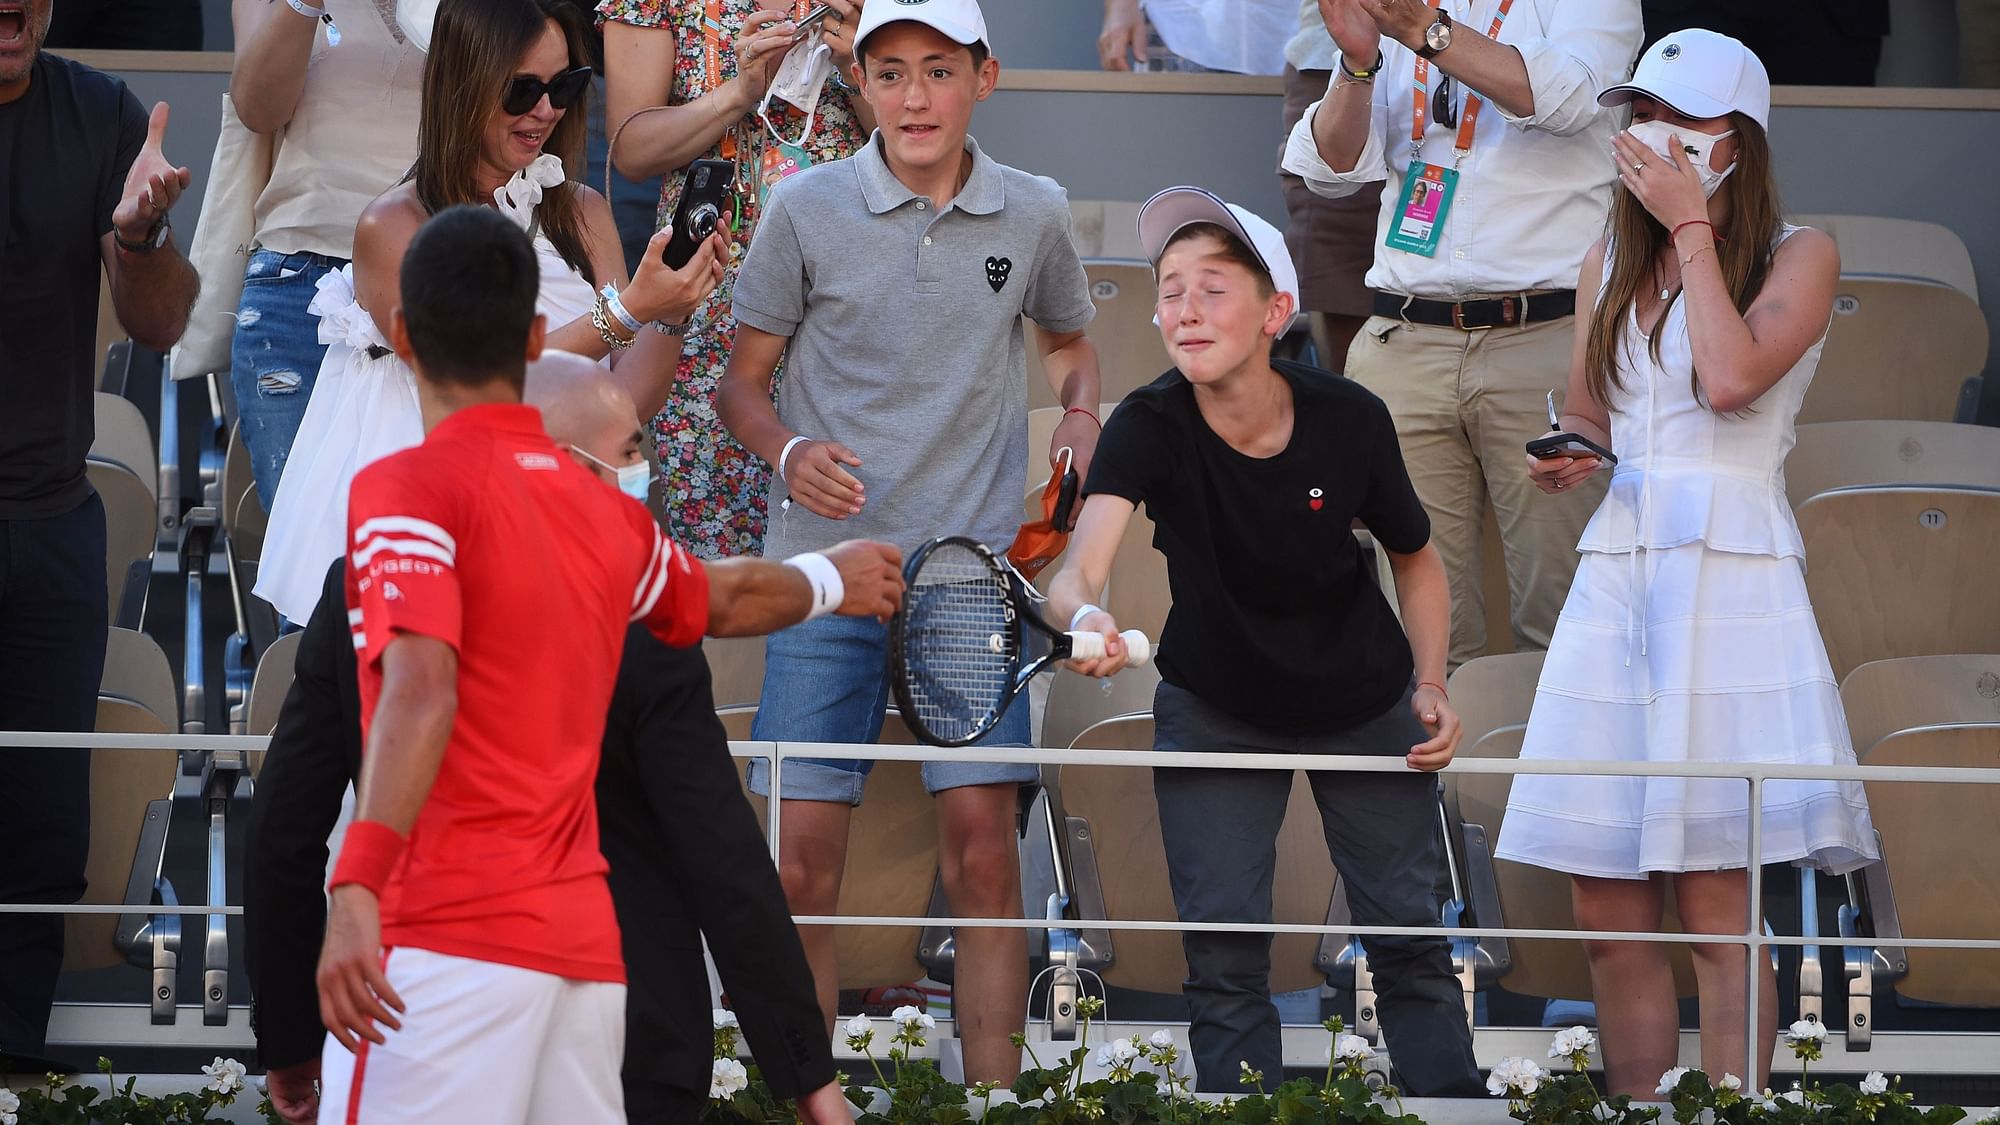 The young boy lifted Djokovic’s spirits when the chips were down.&nbsp;